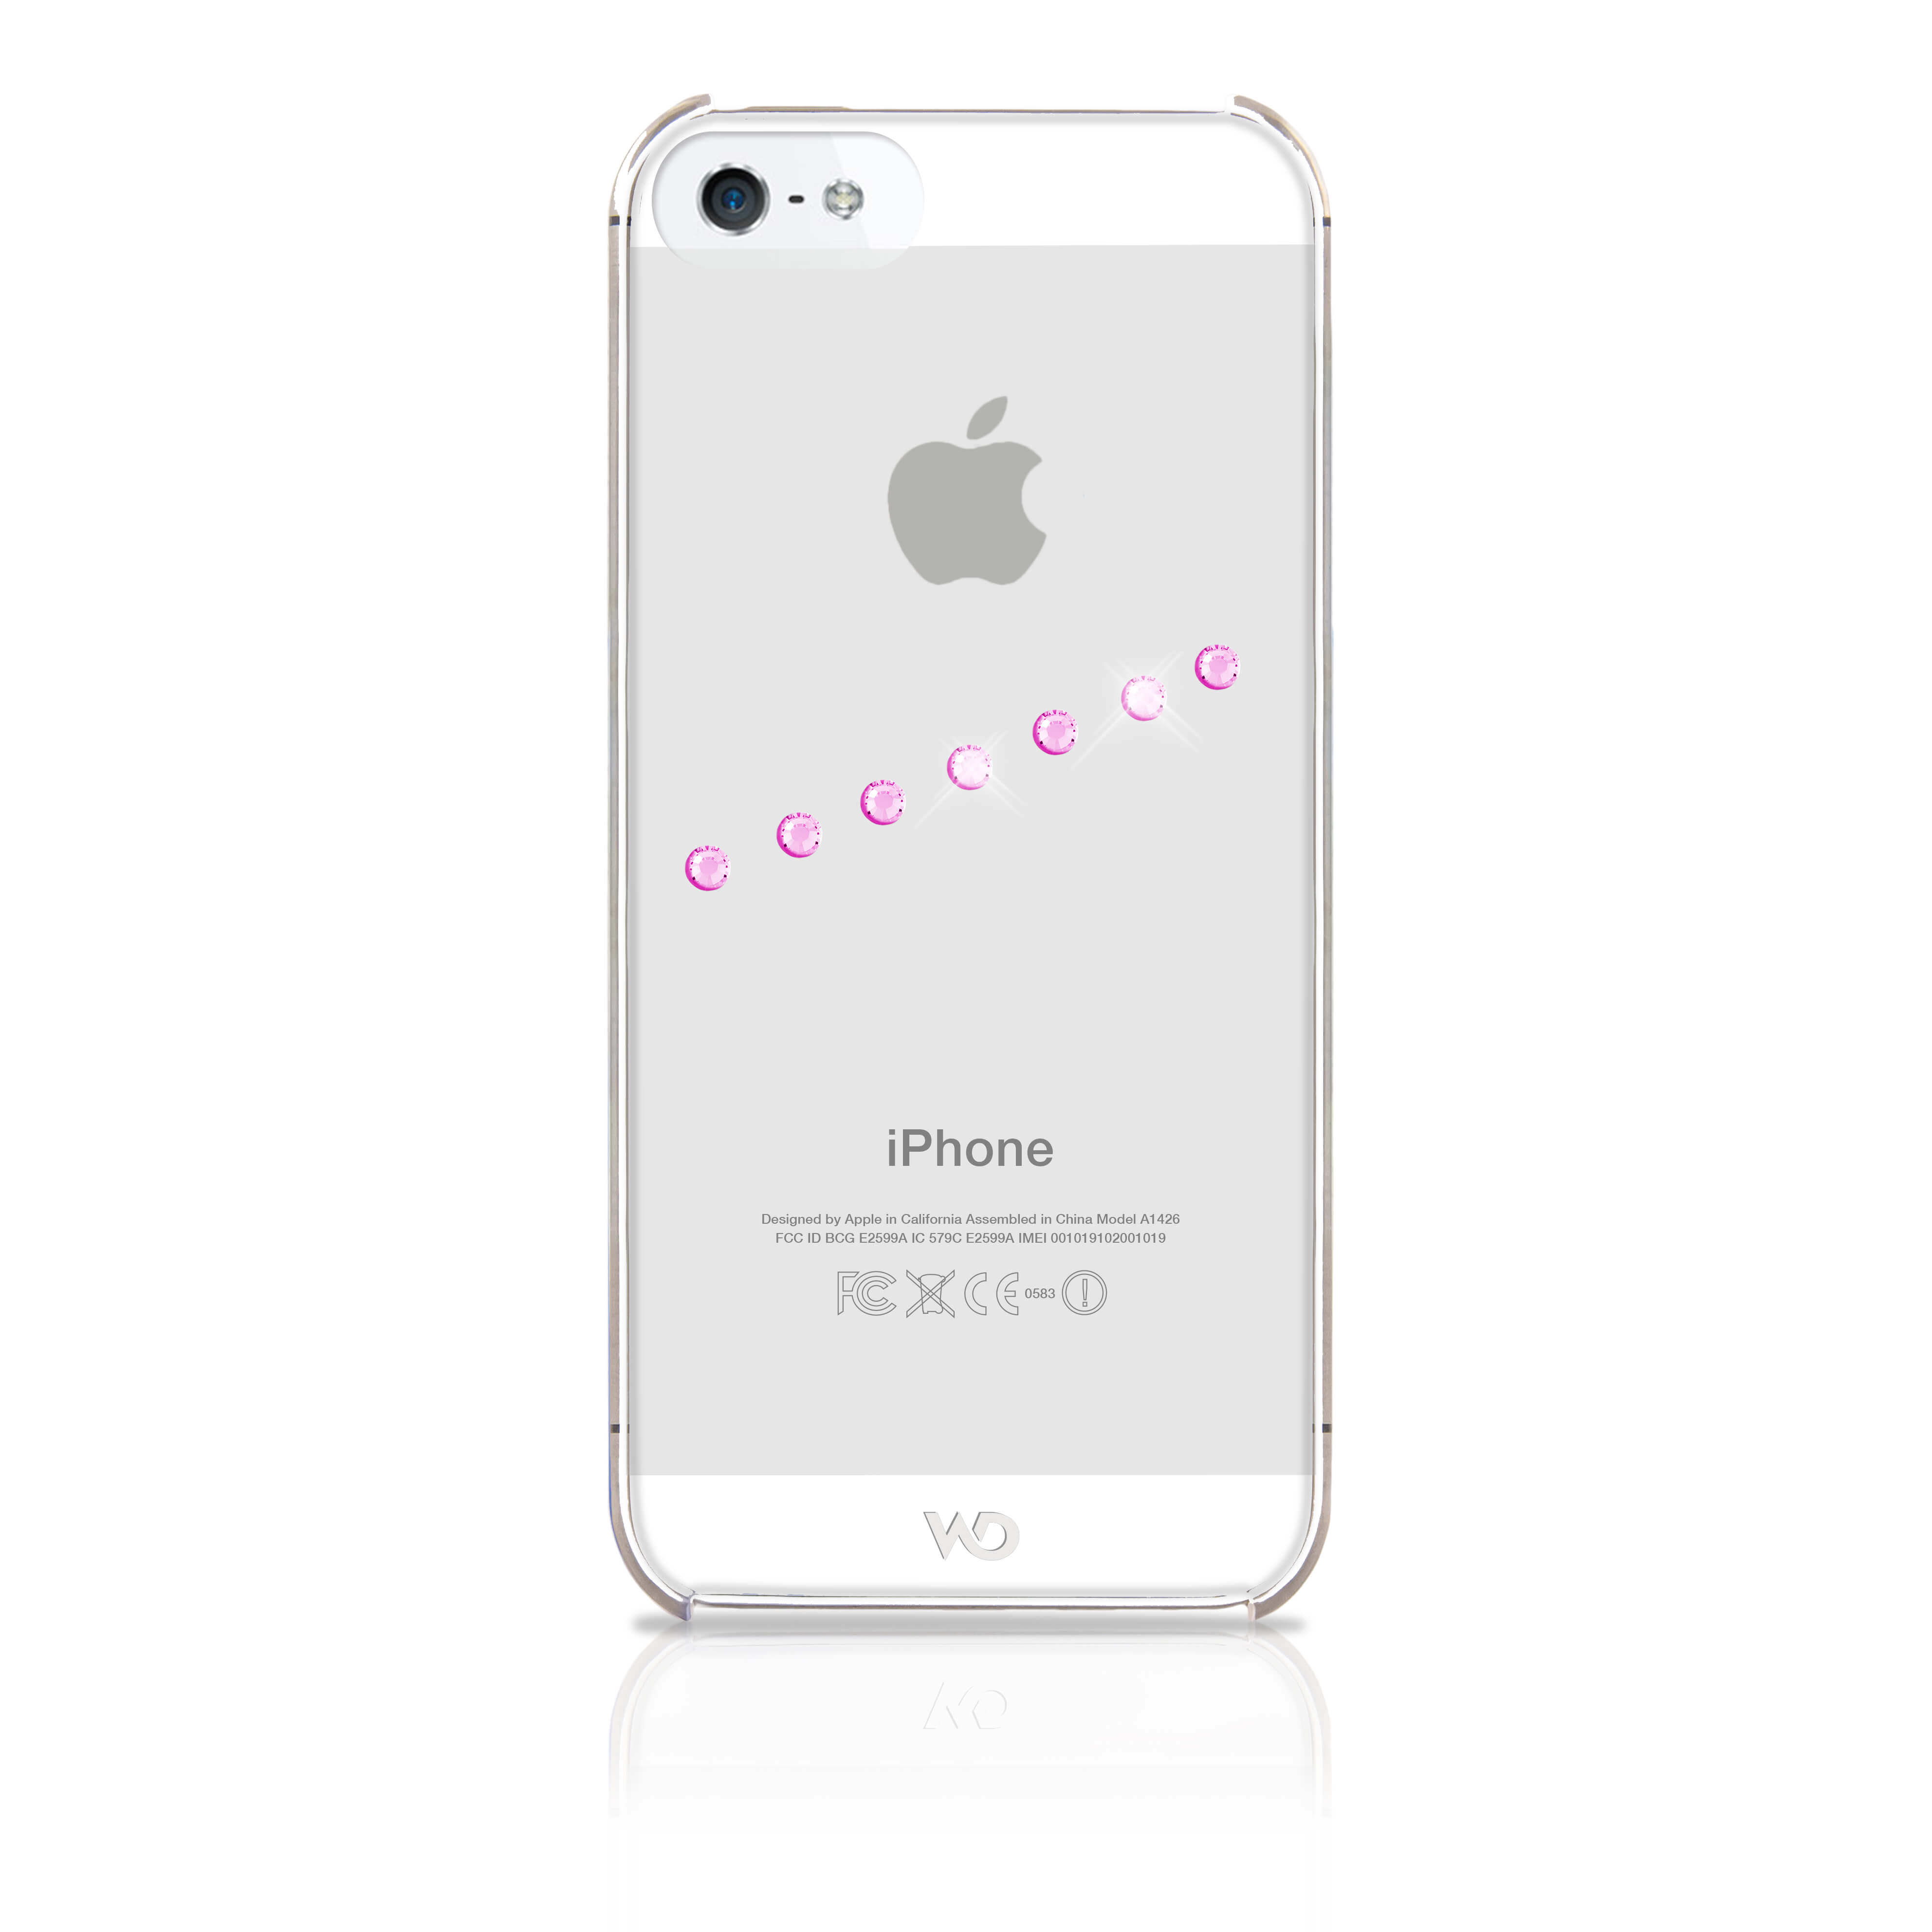 Sash Ice Mobile Phone Cover f or Apple iPhone 5/5s, pink